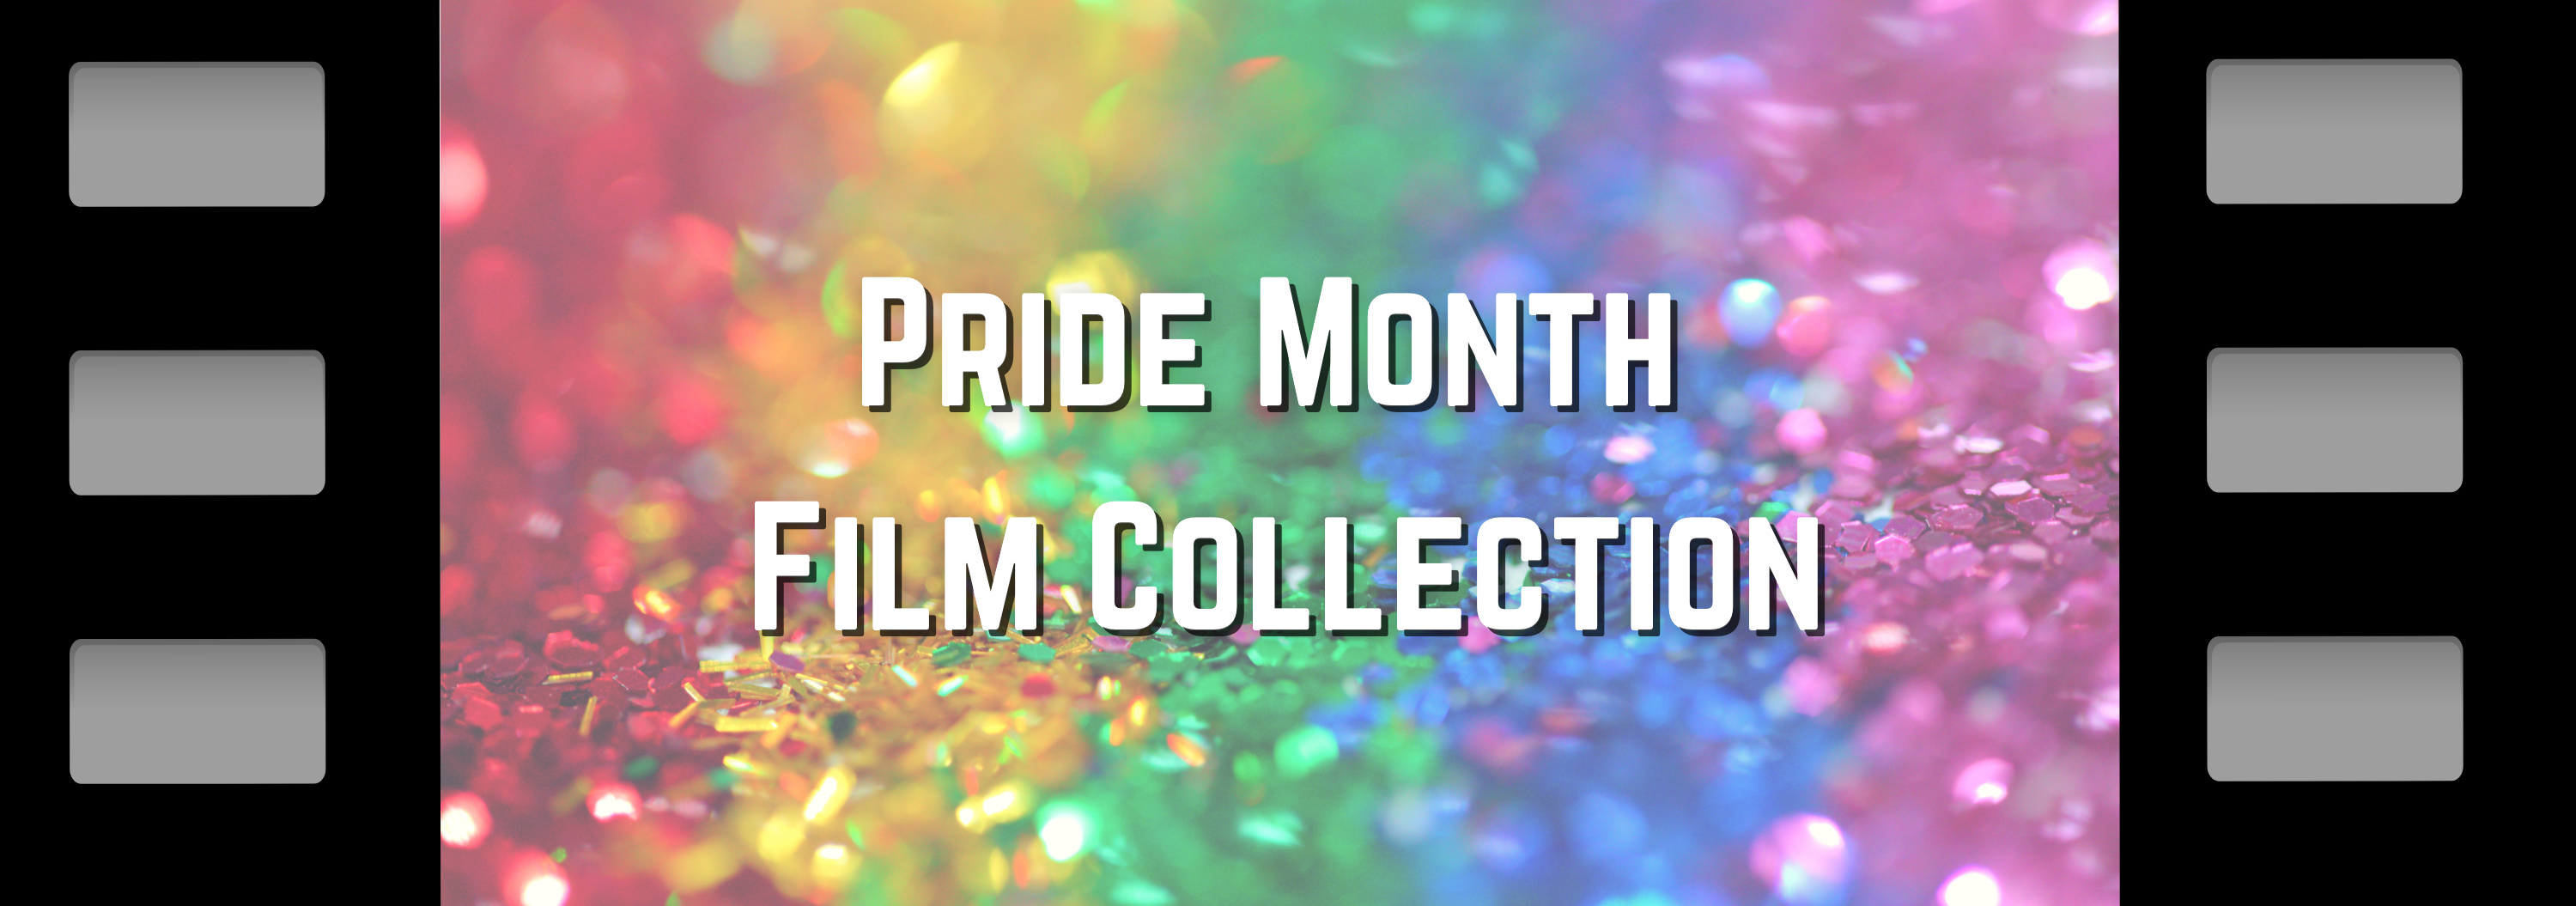 Pride Month Film Collection